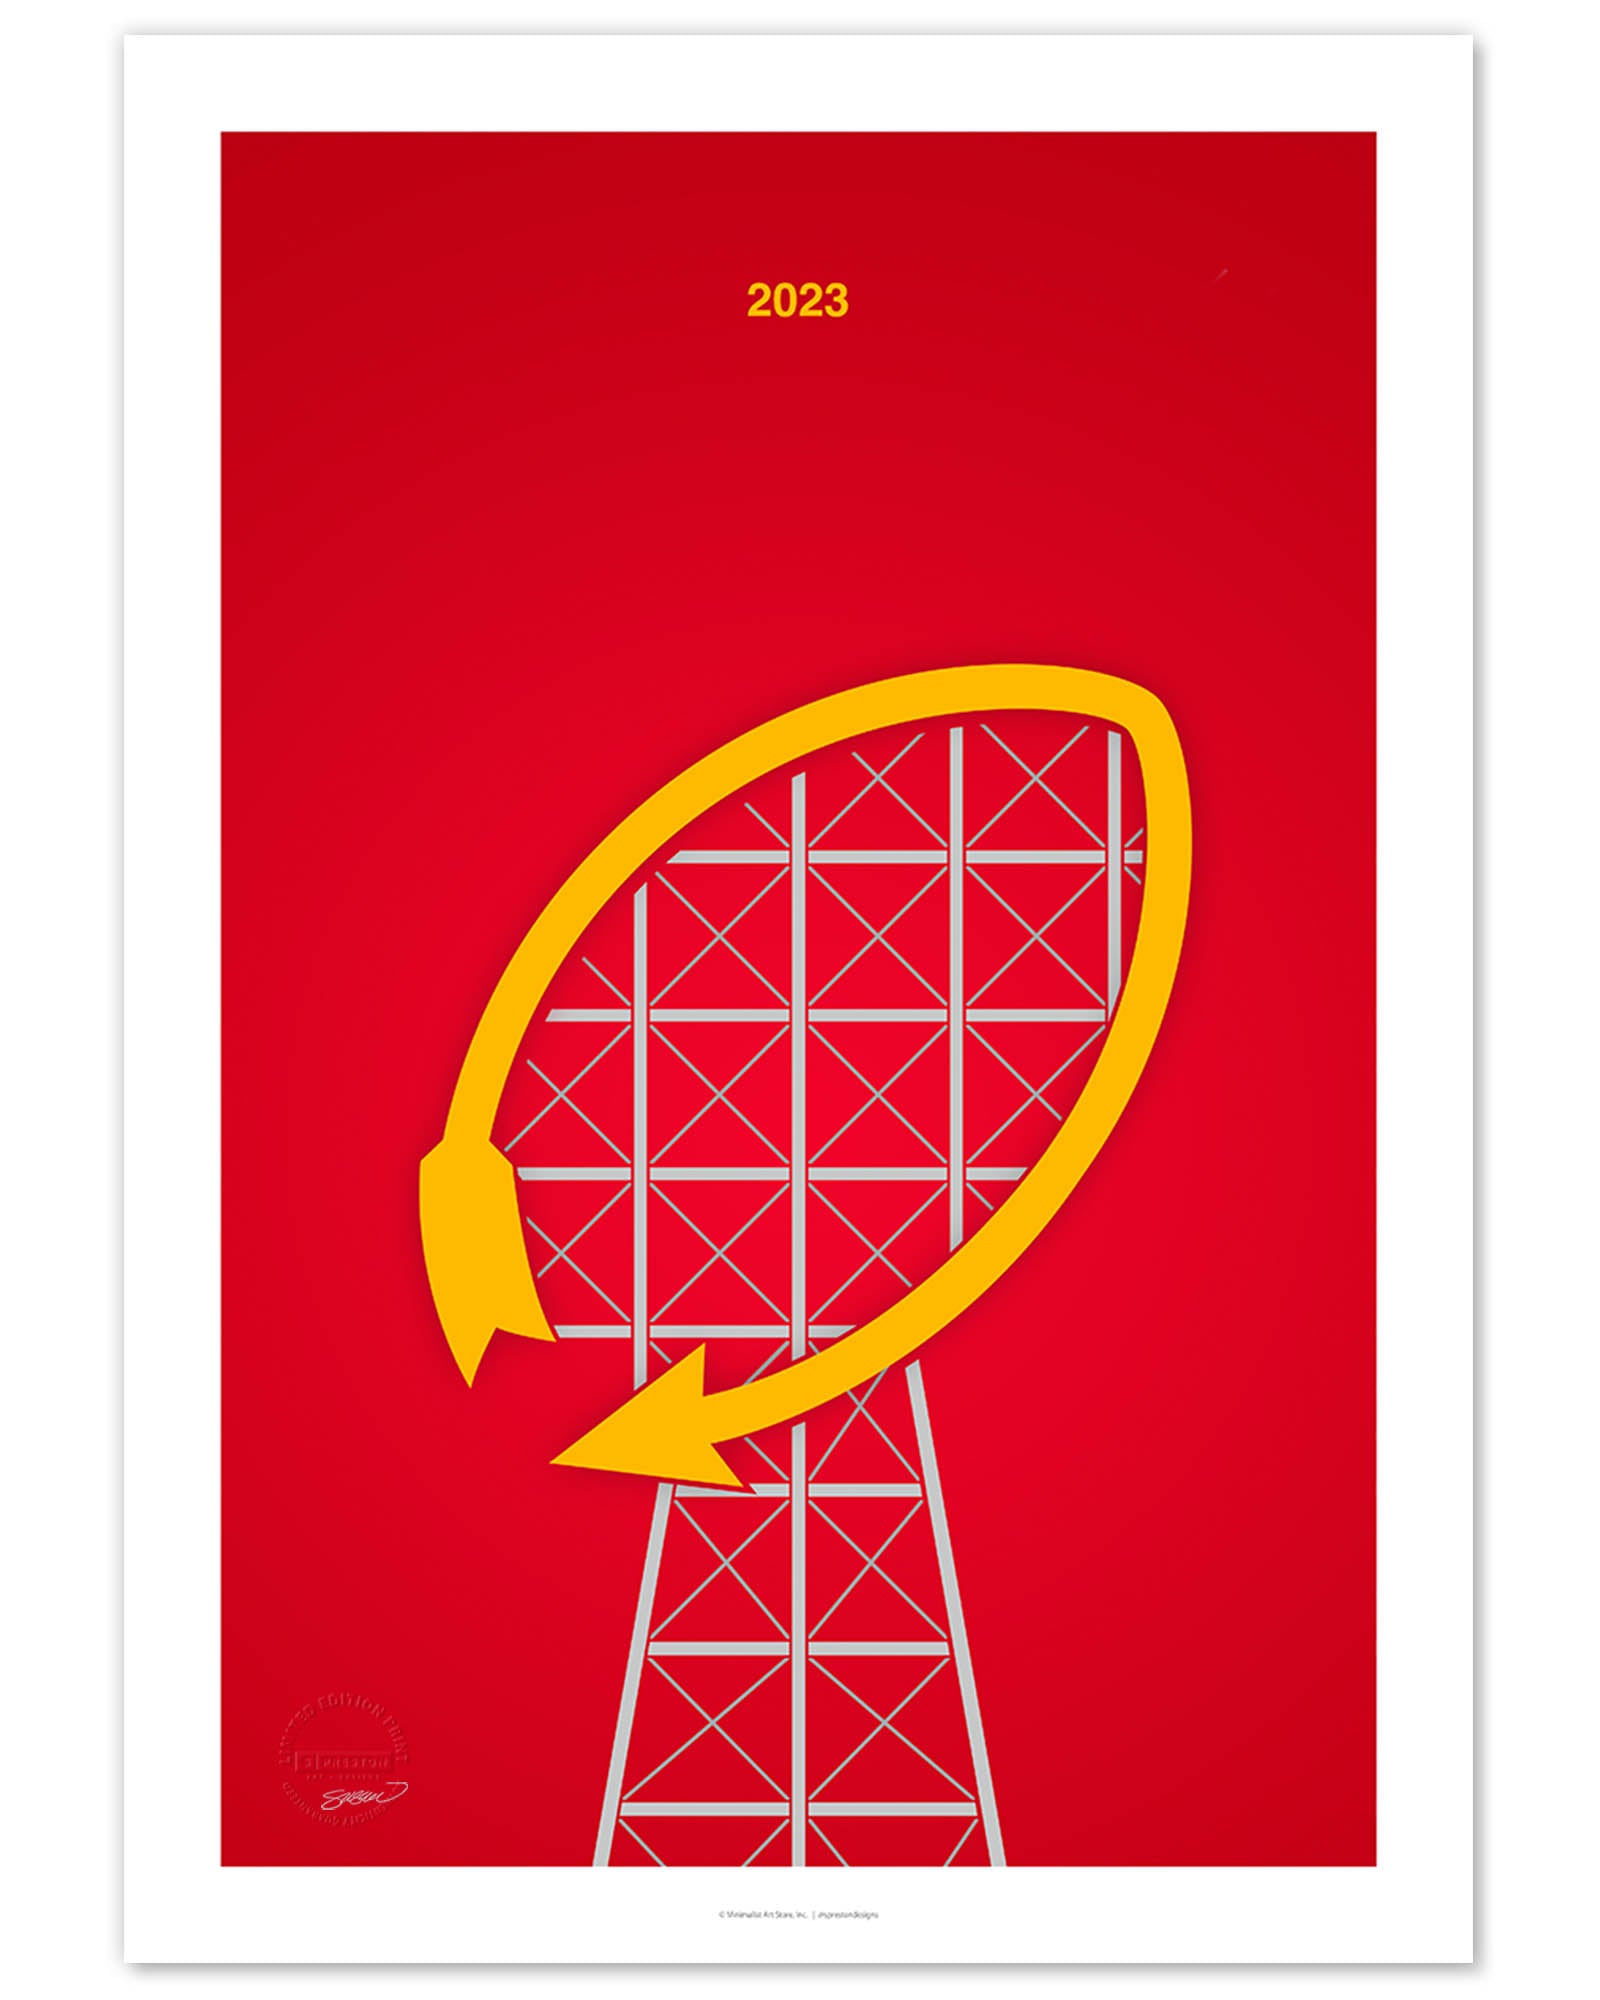 Chiefs 2023 championship rally posters now available for pre-order